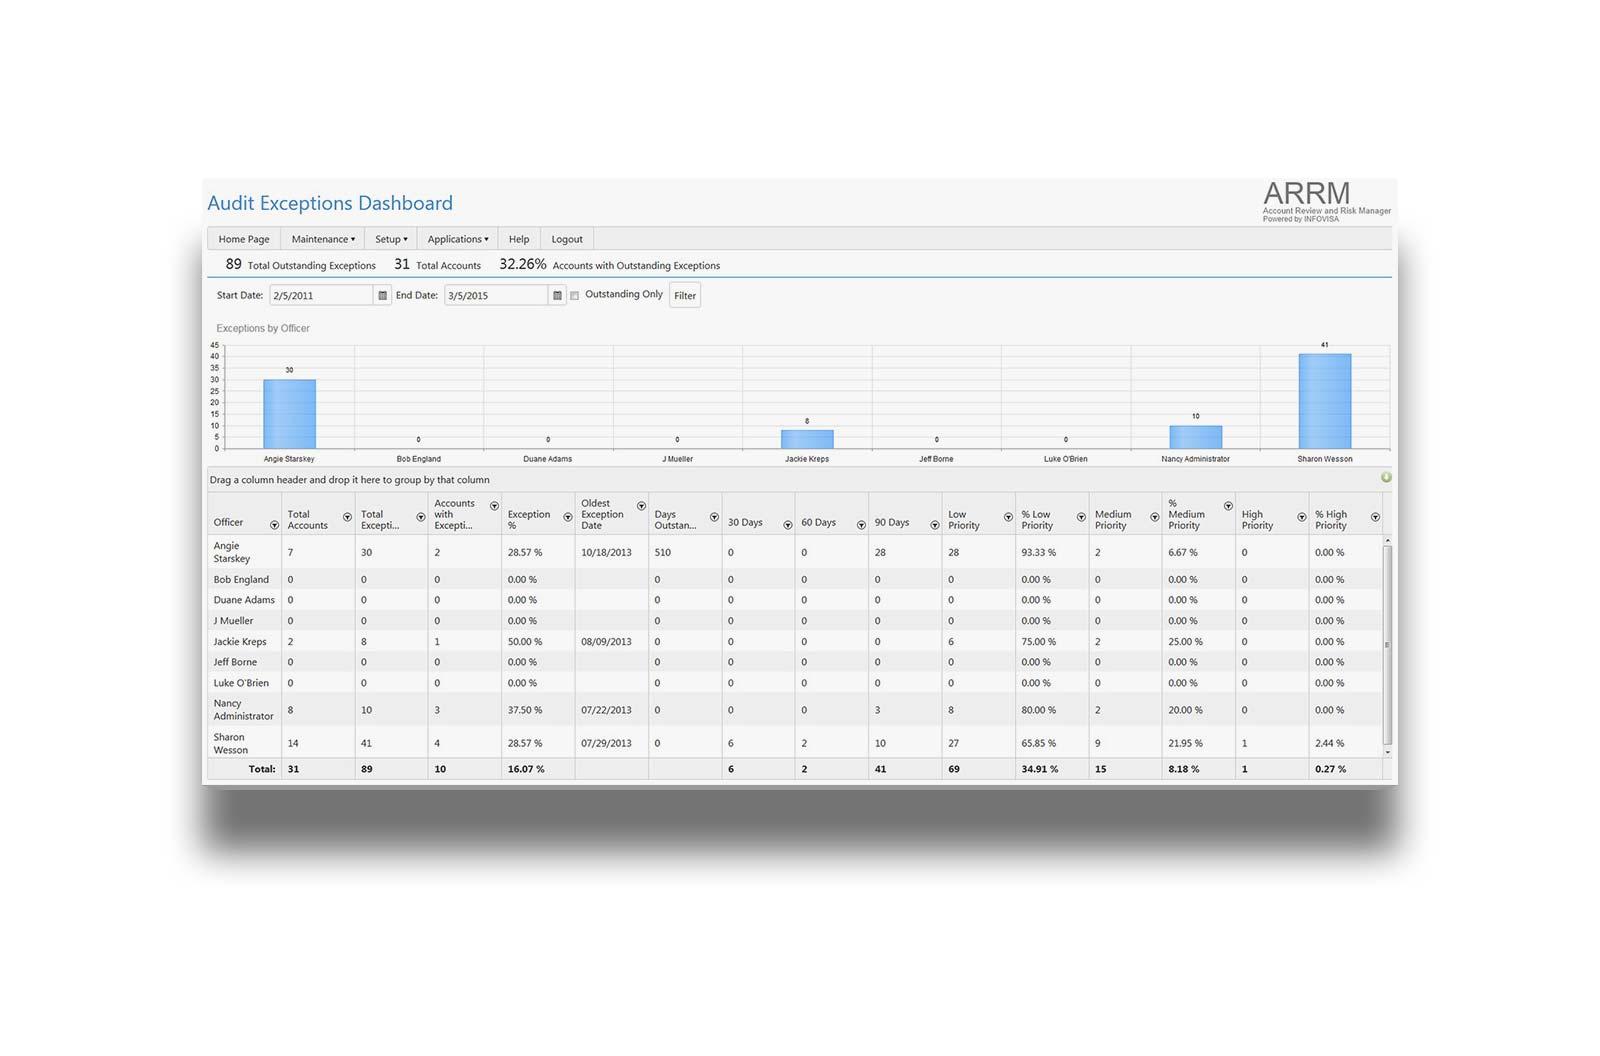 ARRM EXCEPTIONS DASHBOARD